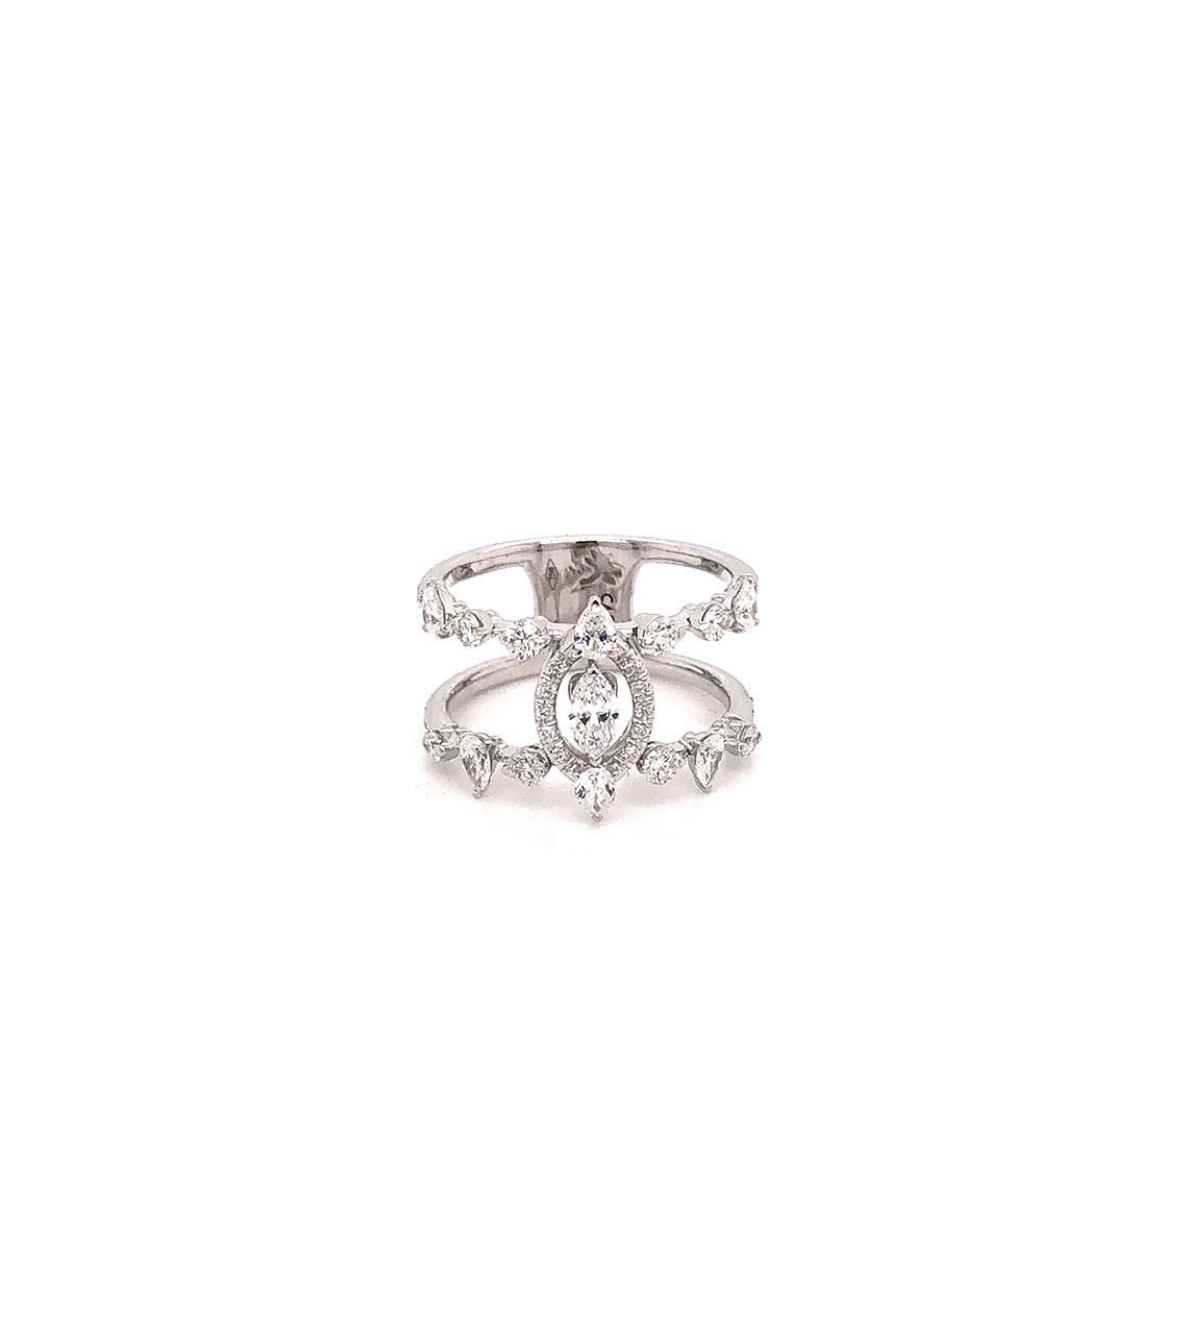 White Gold Ring with Diamonds by Casato